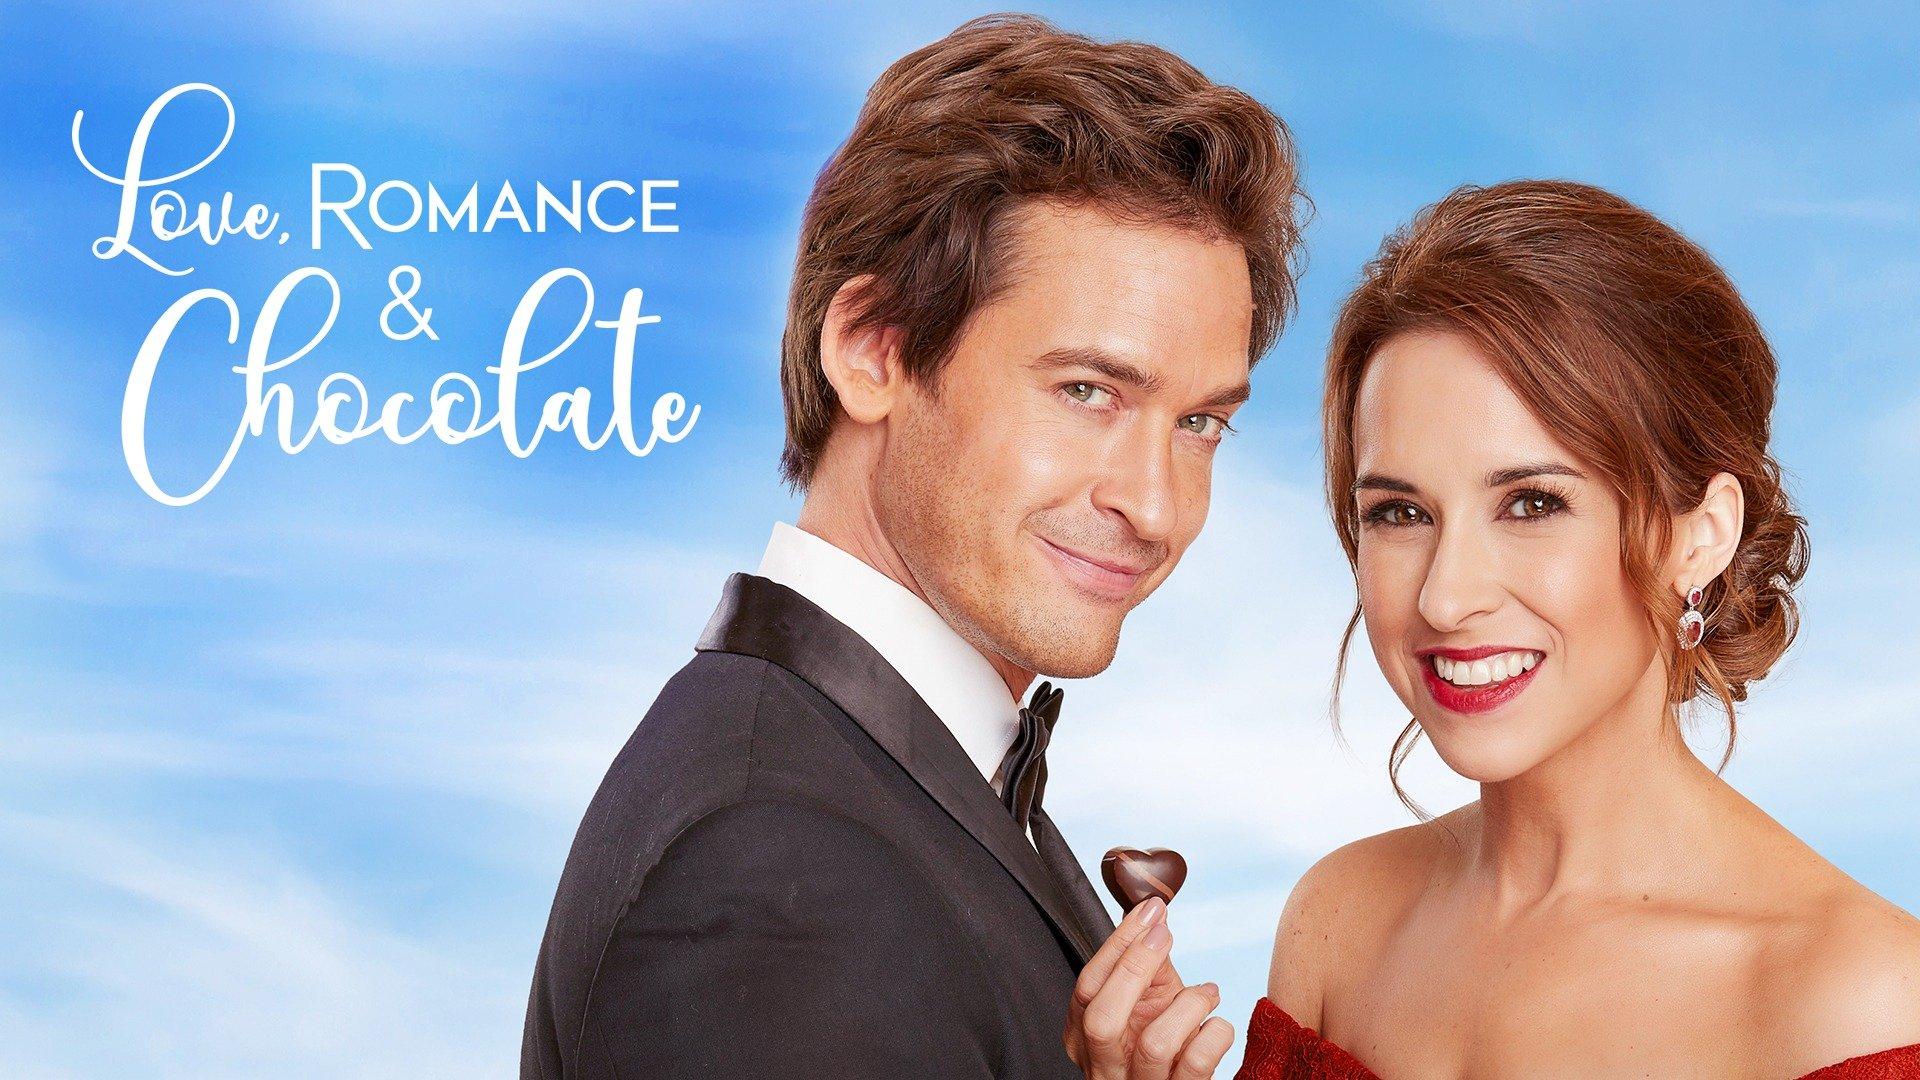 Romance with Chocolate - Hidden Items for ipod download